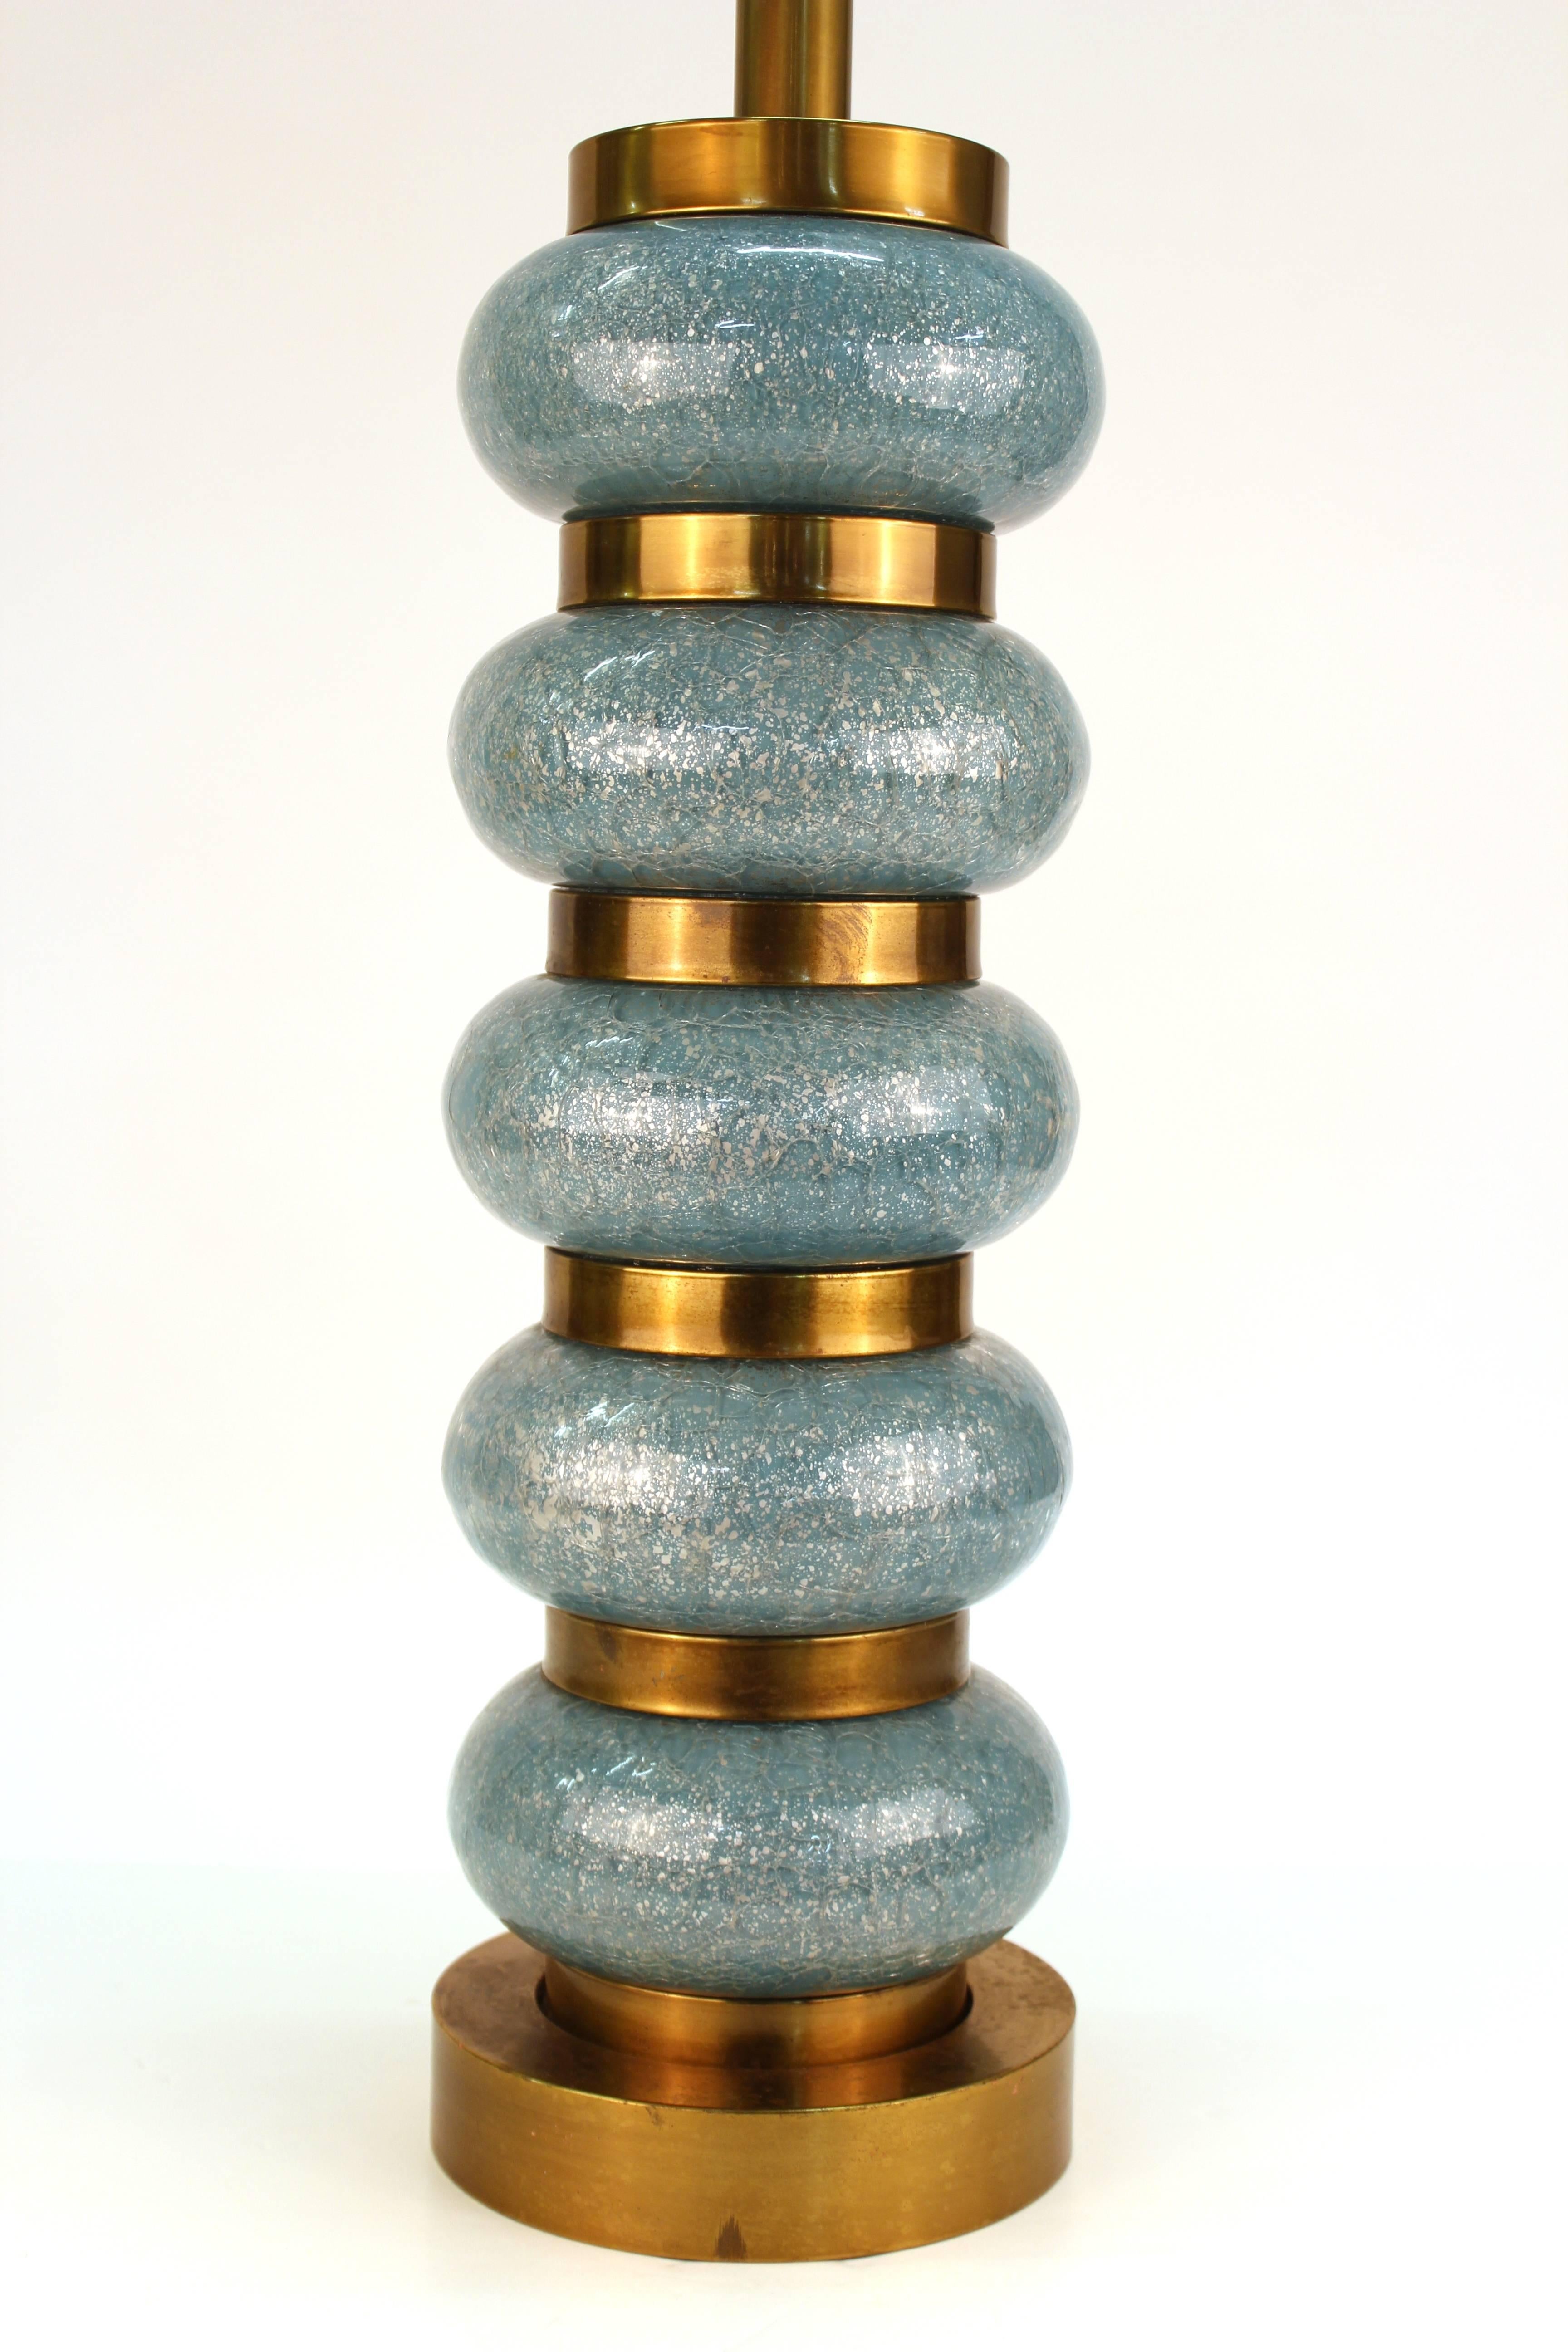 A Mid-century modern style table lamp with stacked Italian crackled glass elements. The lamp is in great vintage condition, with some loss to the color coating inside of the glass.